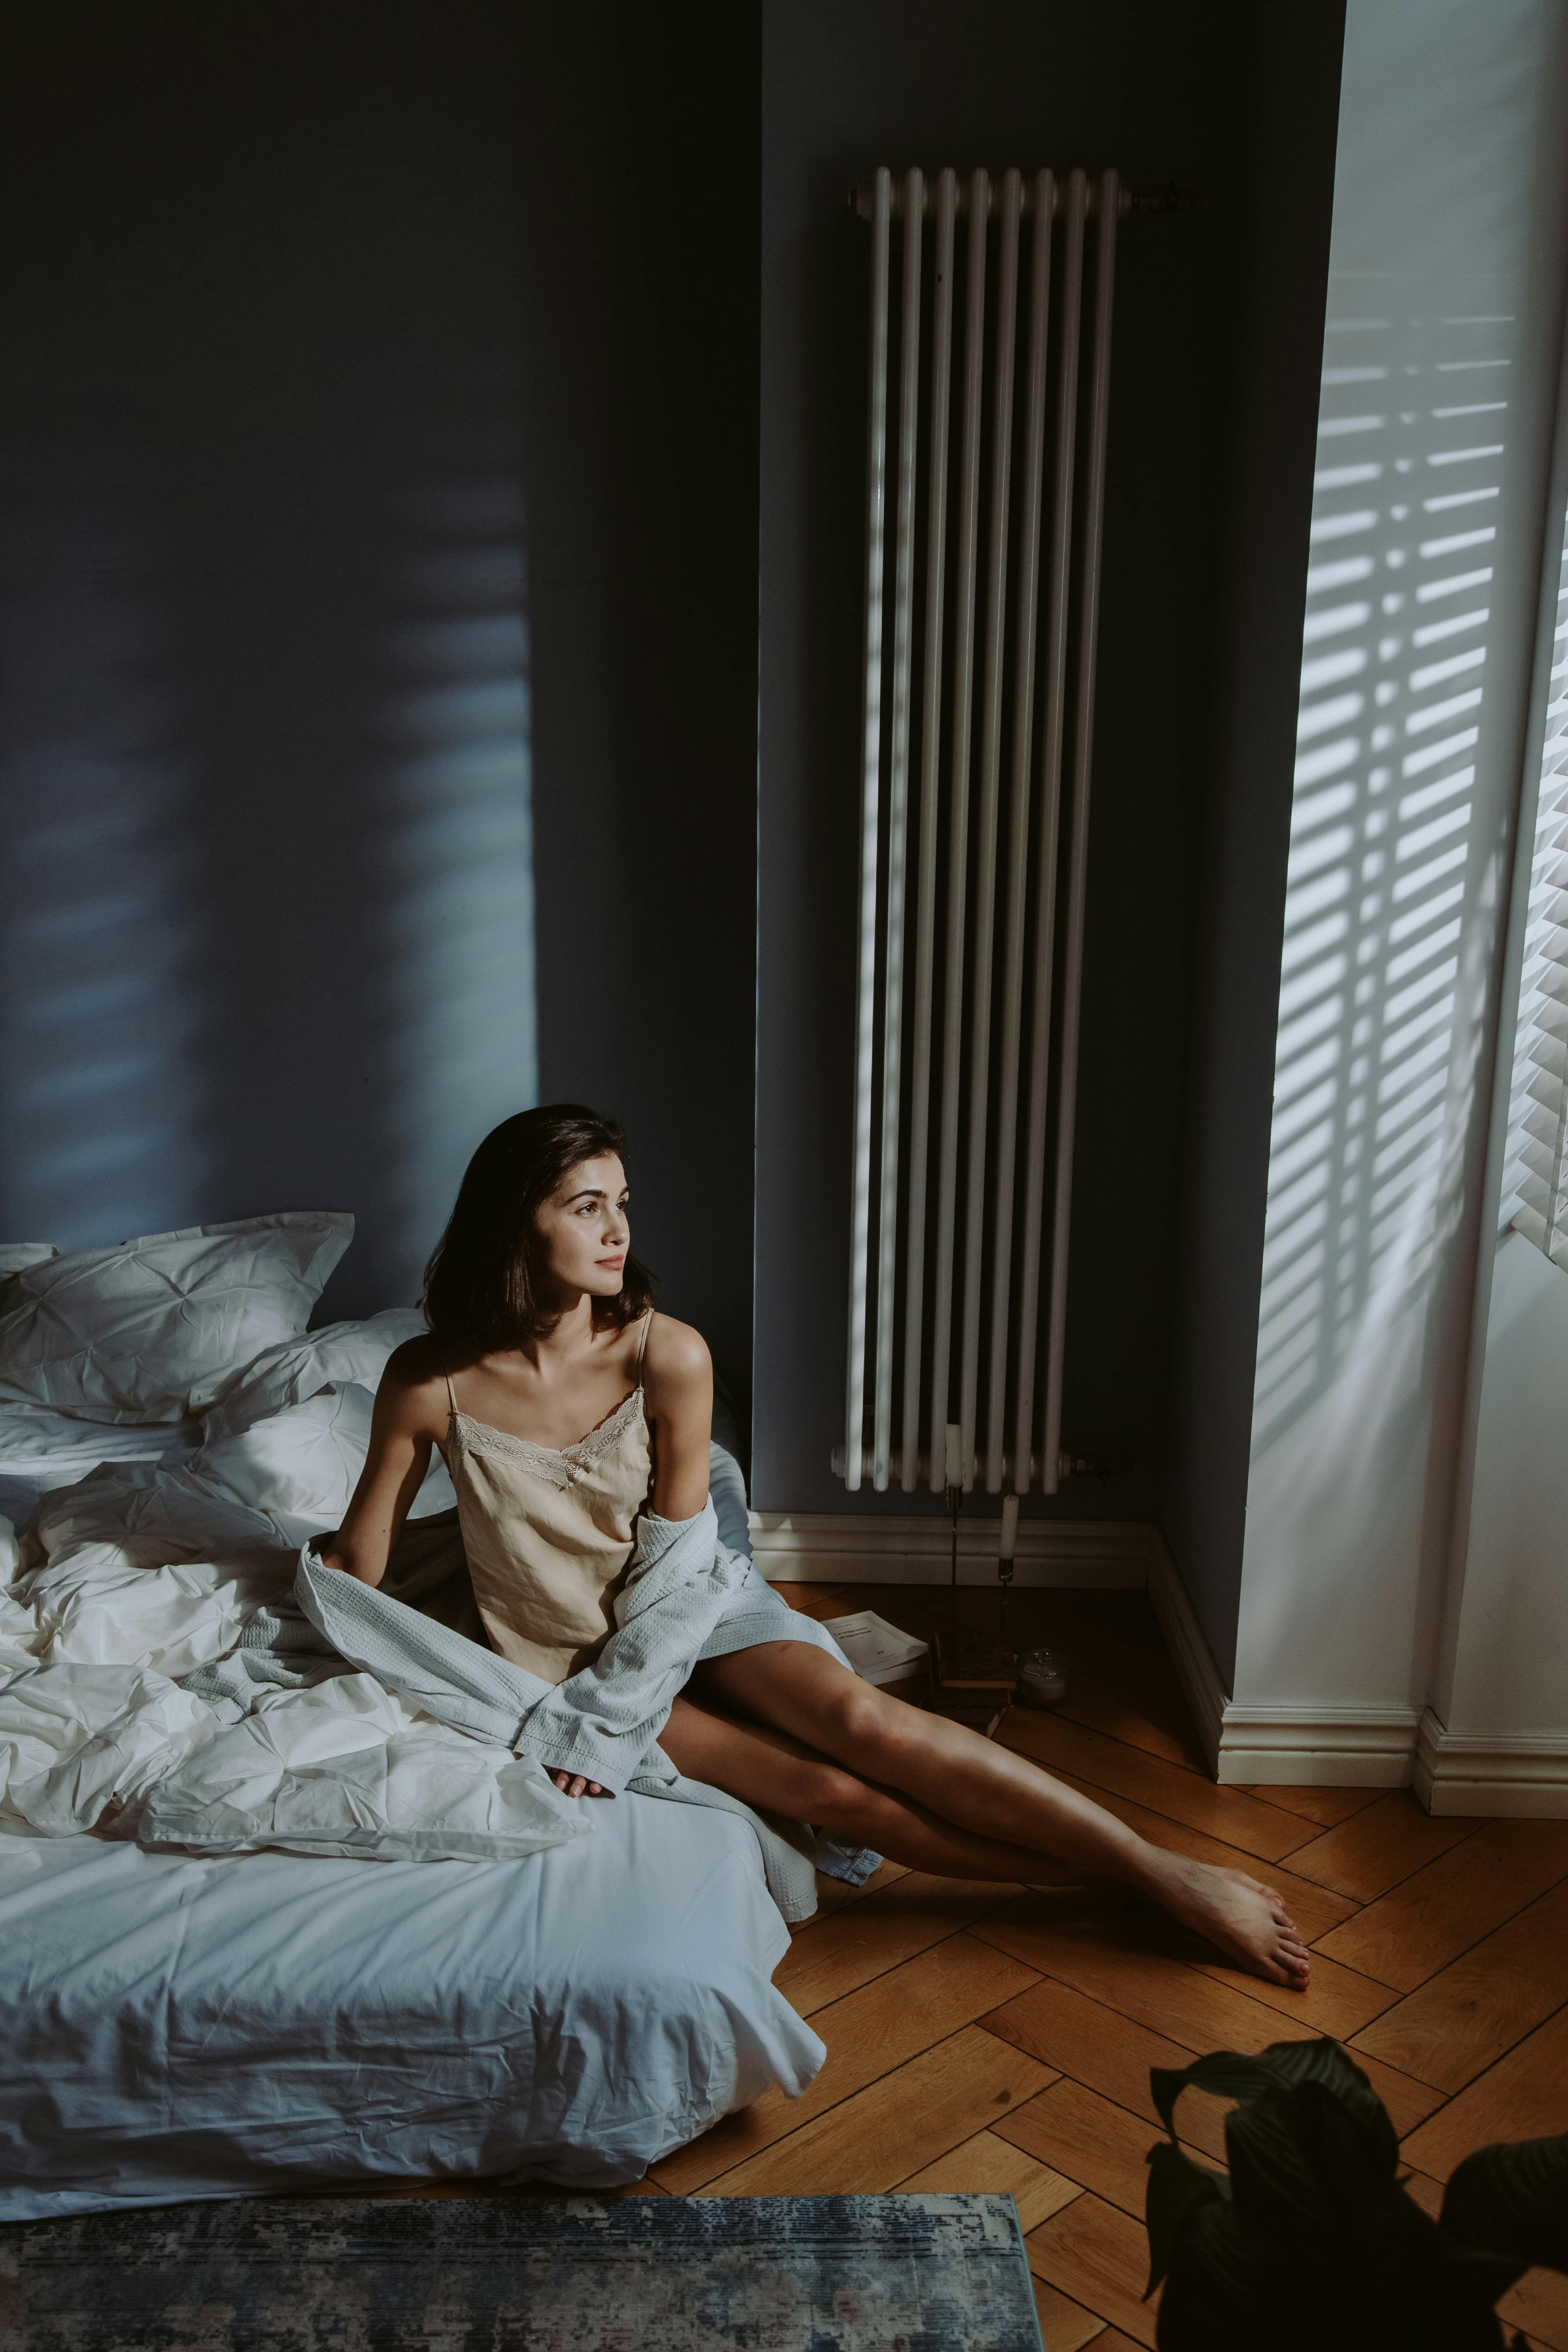 Woman Sitting On Bed. Image & Photo (Free Trial)